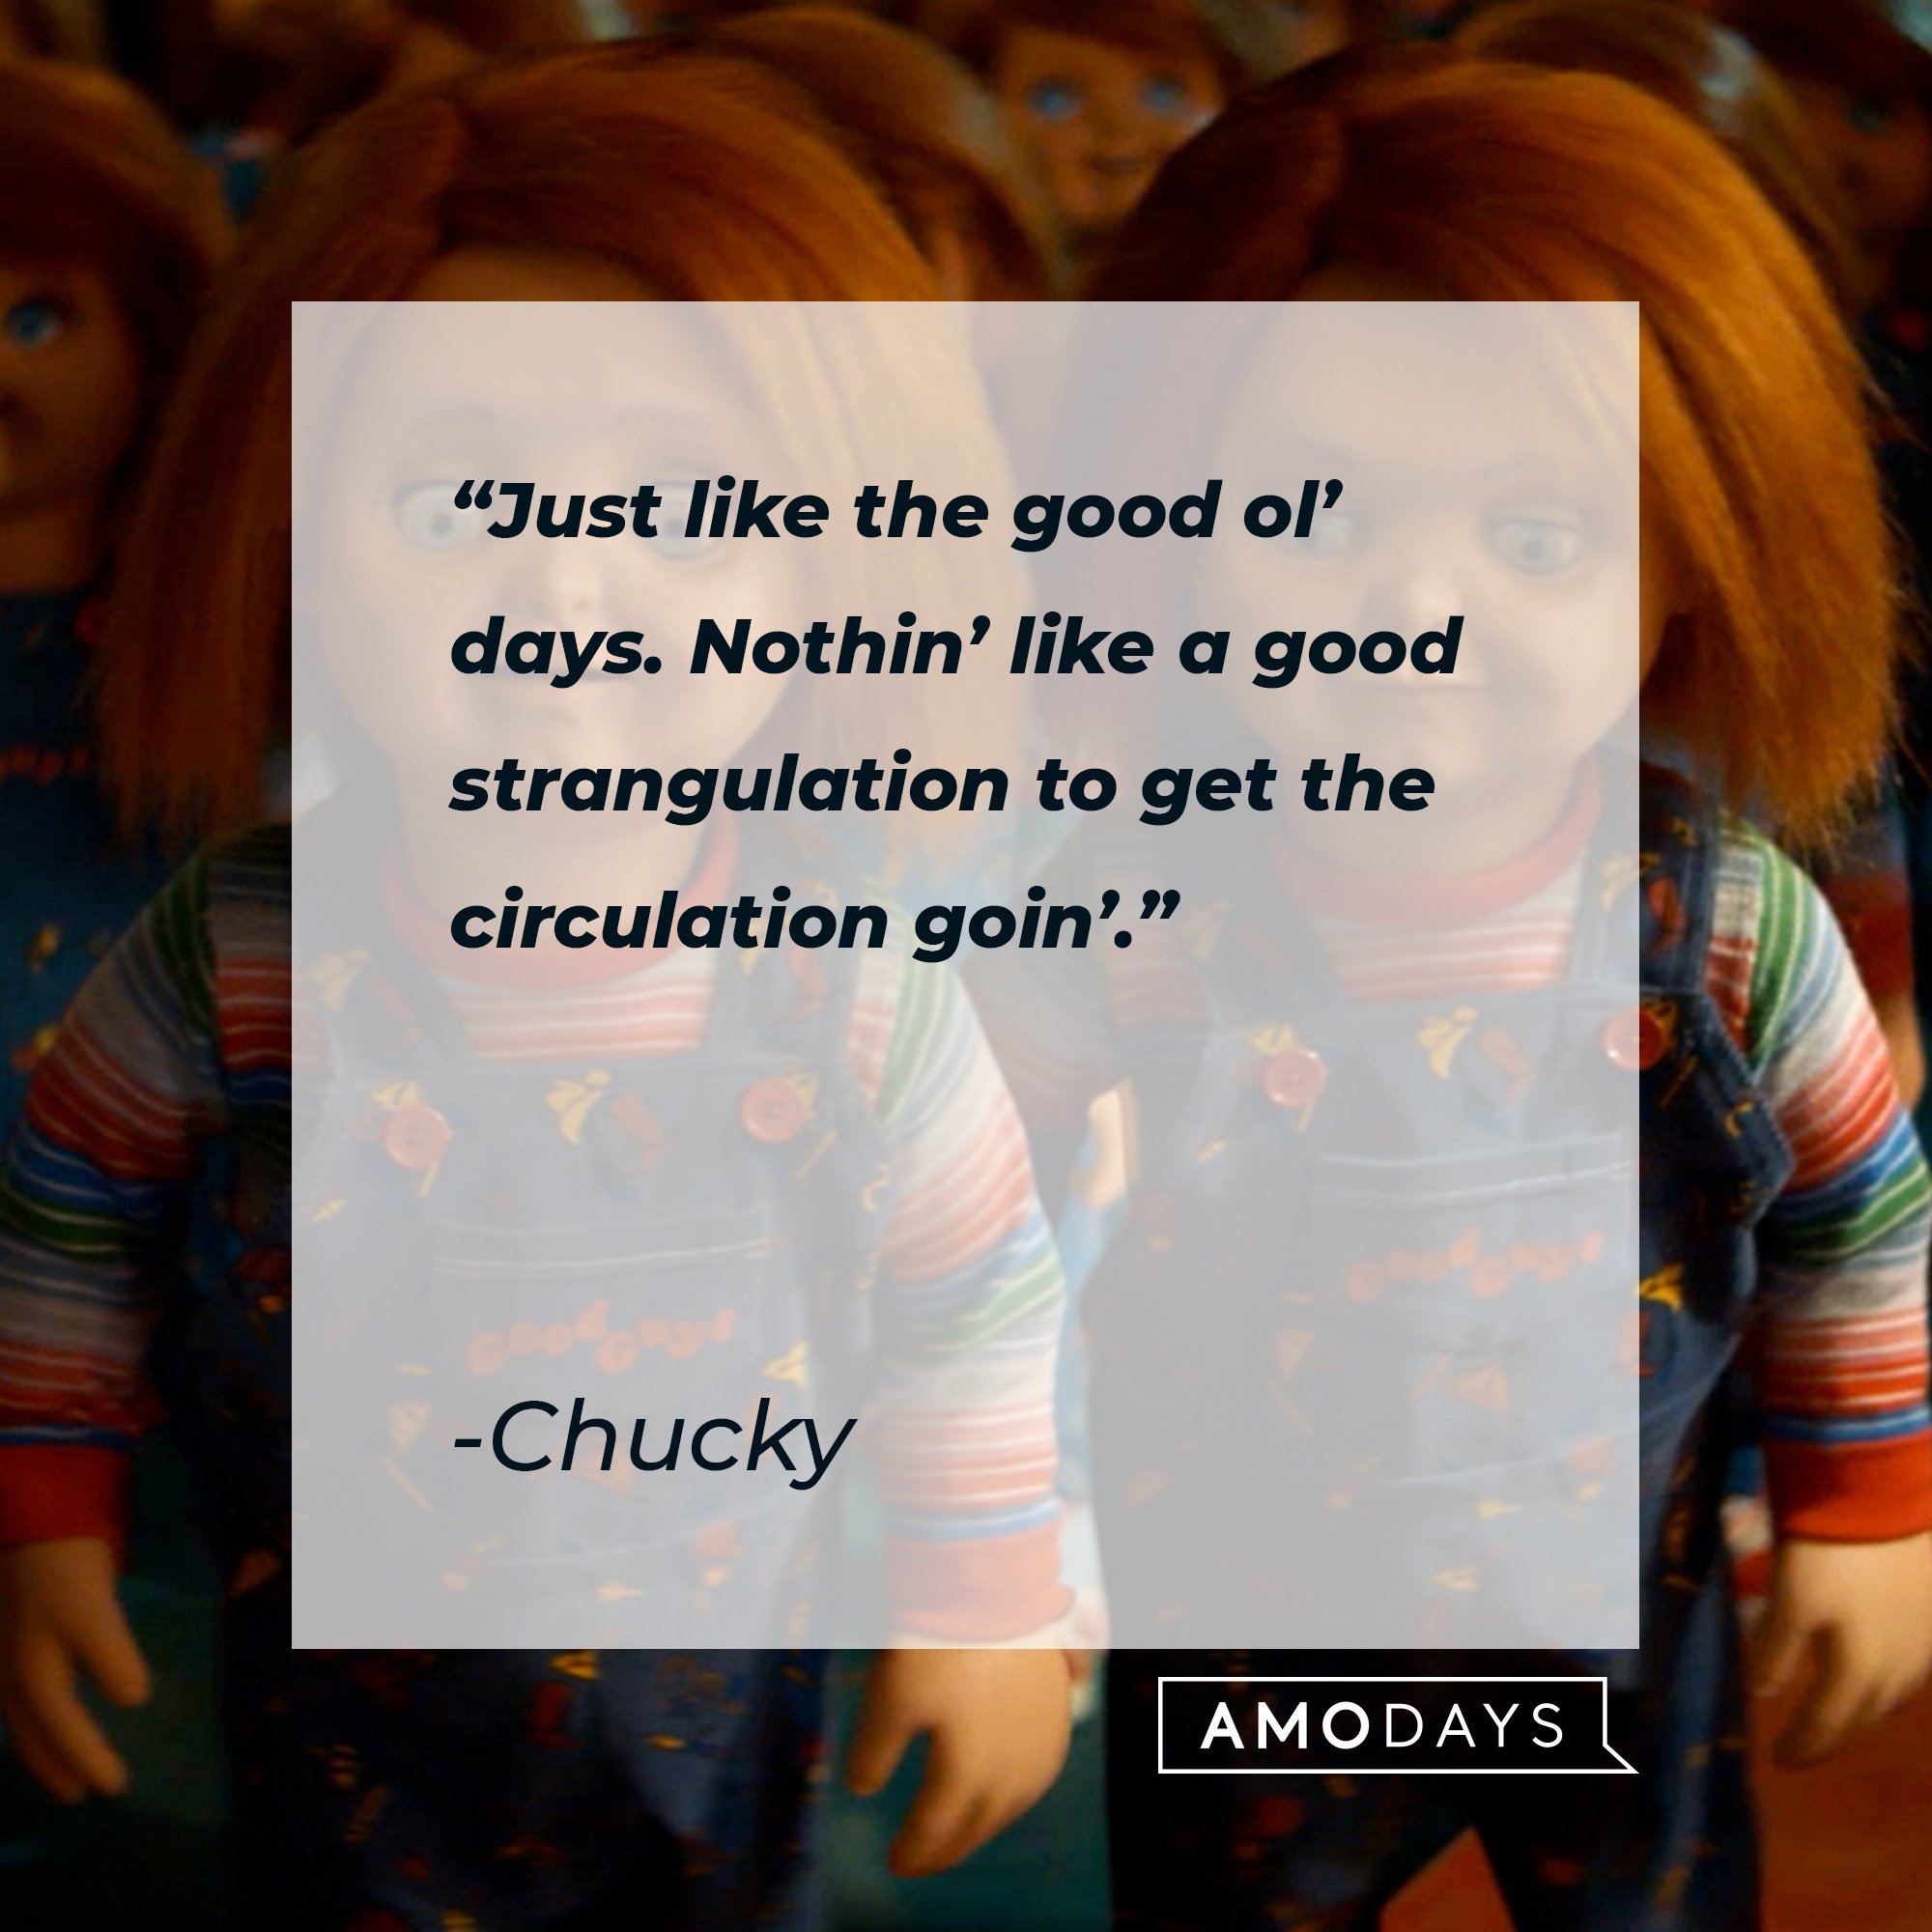 Chucky's quote: “Just like the good ol’ days. Nothin' like a good strangulation to get the circulation goin'." | Image: AmoDays